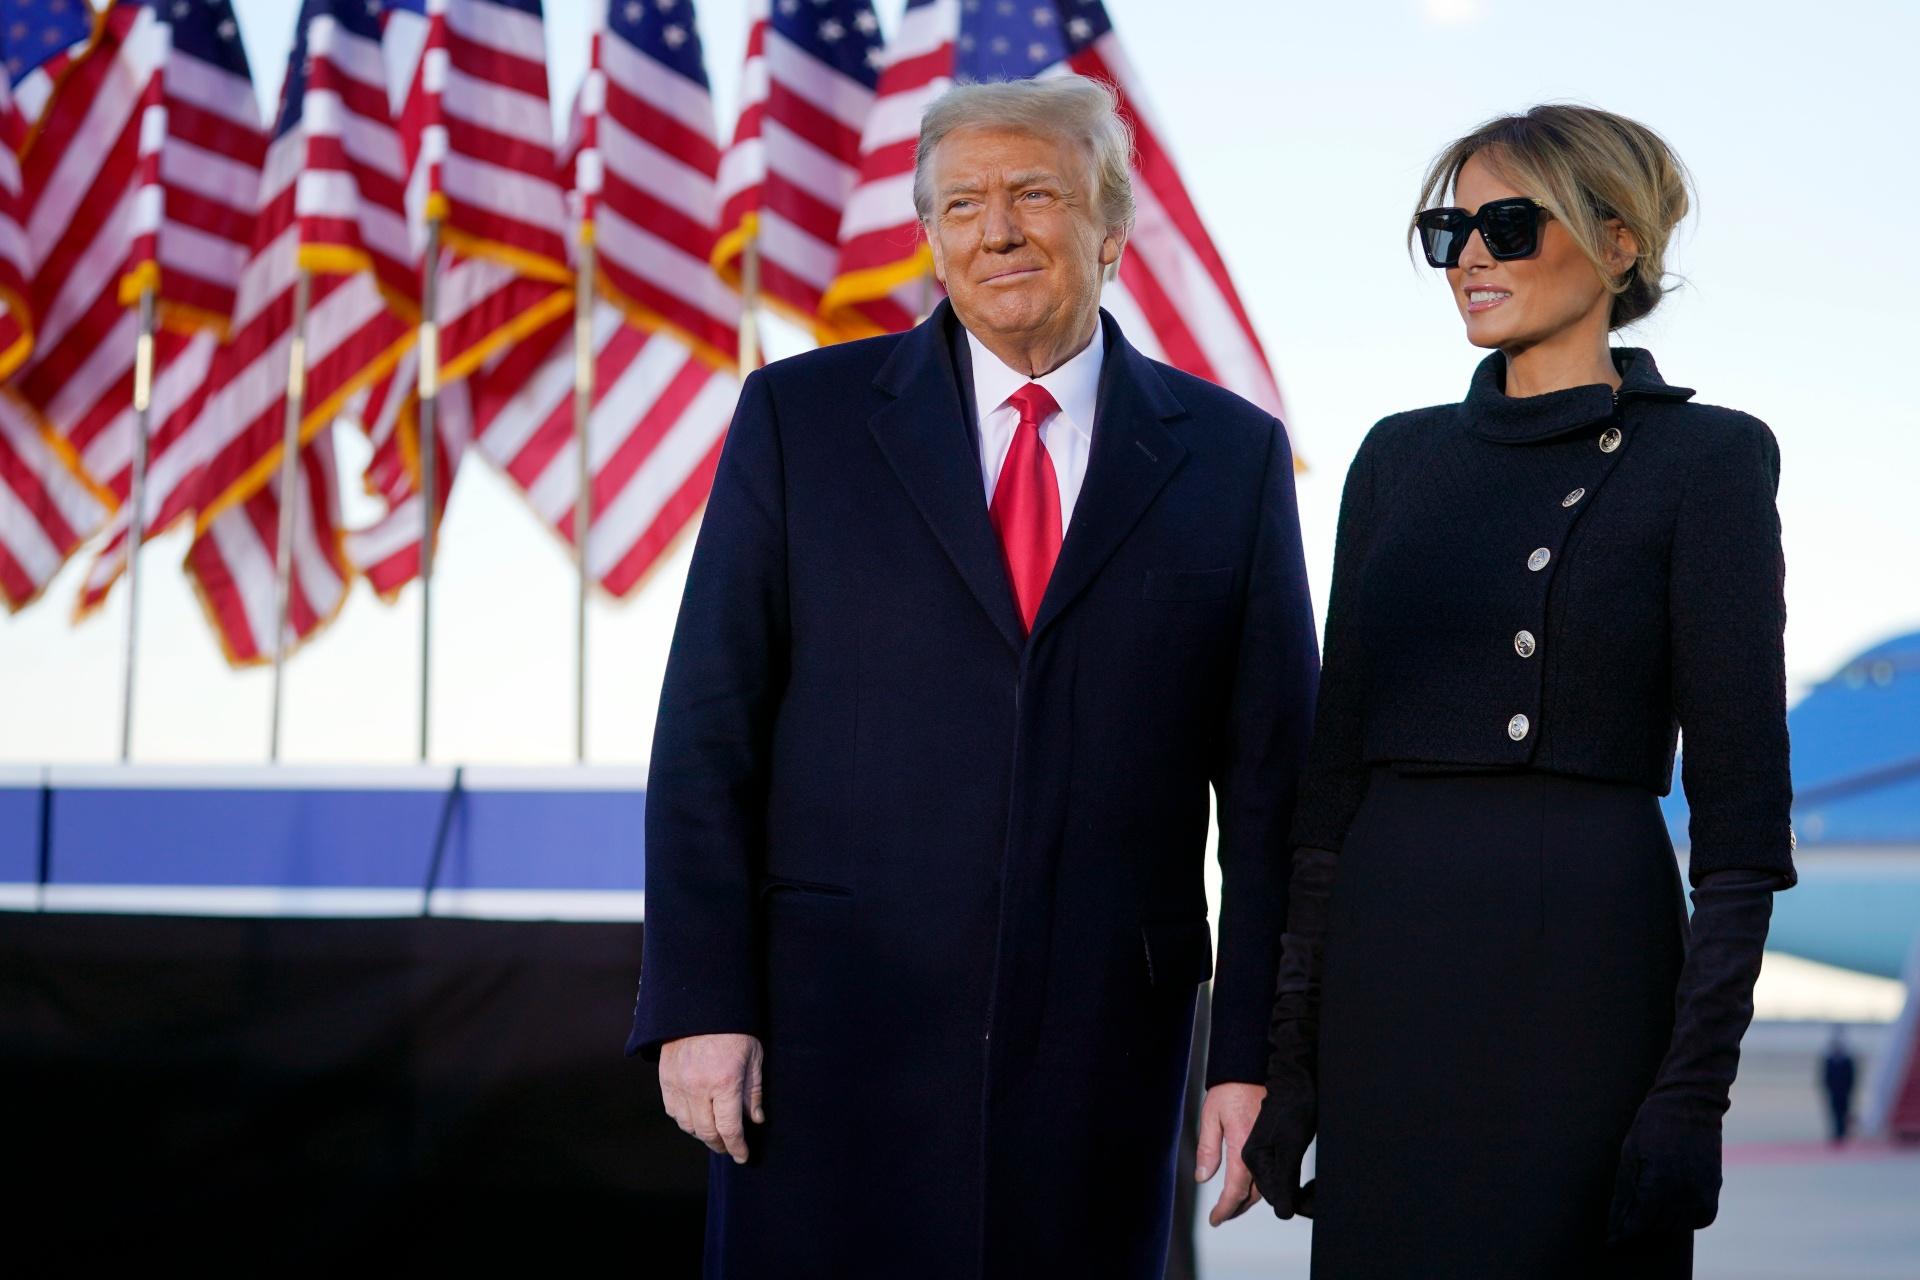 President Donald Trump and first lady Melania Trump look at supporters before boarding Air Force One at Andrews Air Force Base, Md., Wednesday, Jan. 20, 2021. (AP Photo / Manuel Balce Ceneta)